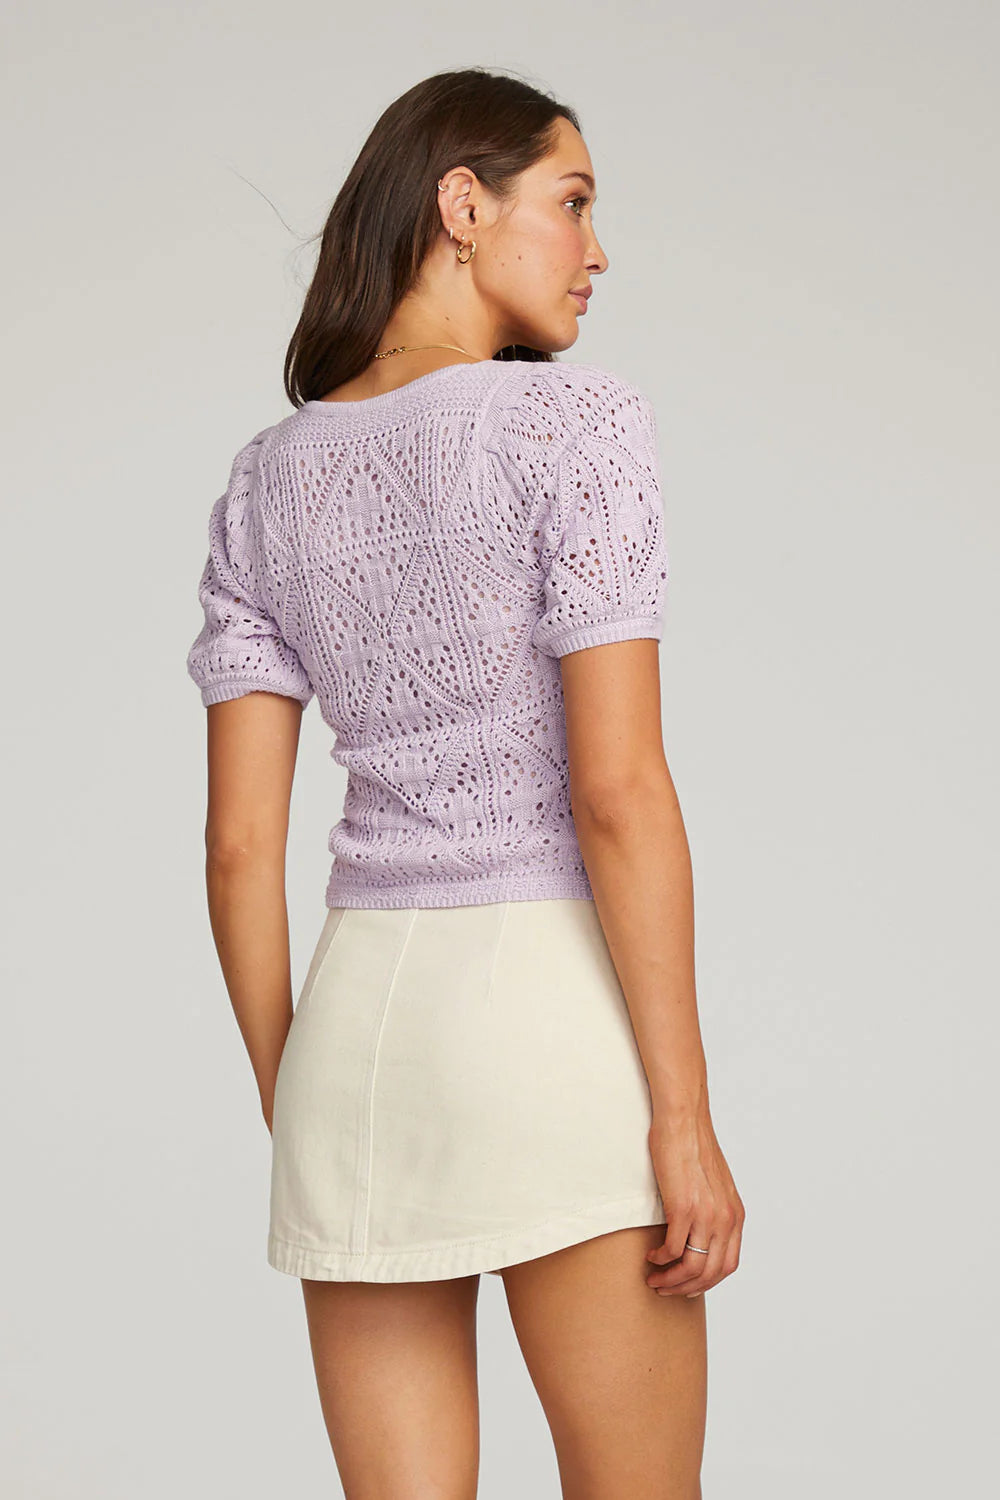 Jase Sweater by Saltwater Luxe